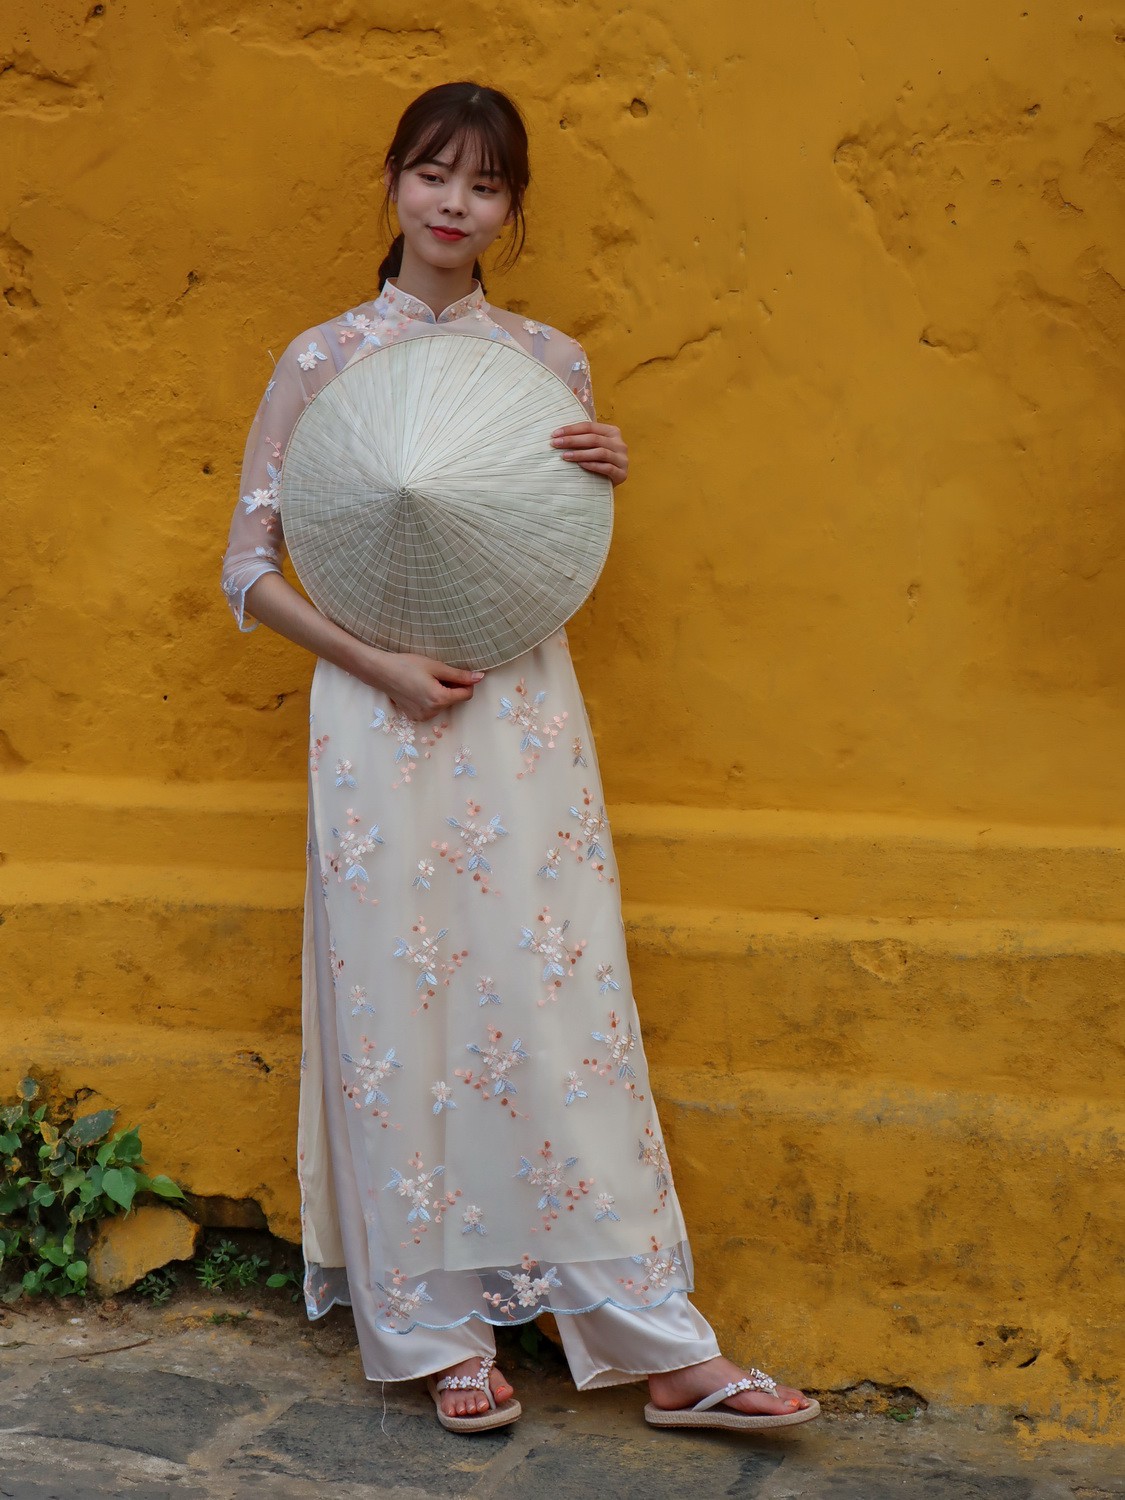 Lady in Hoi An